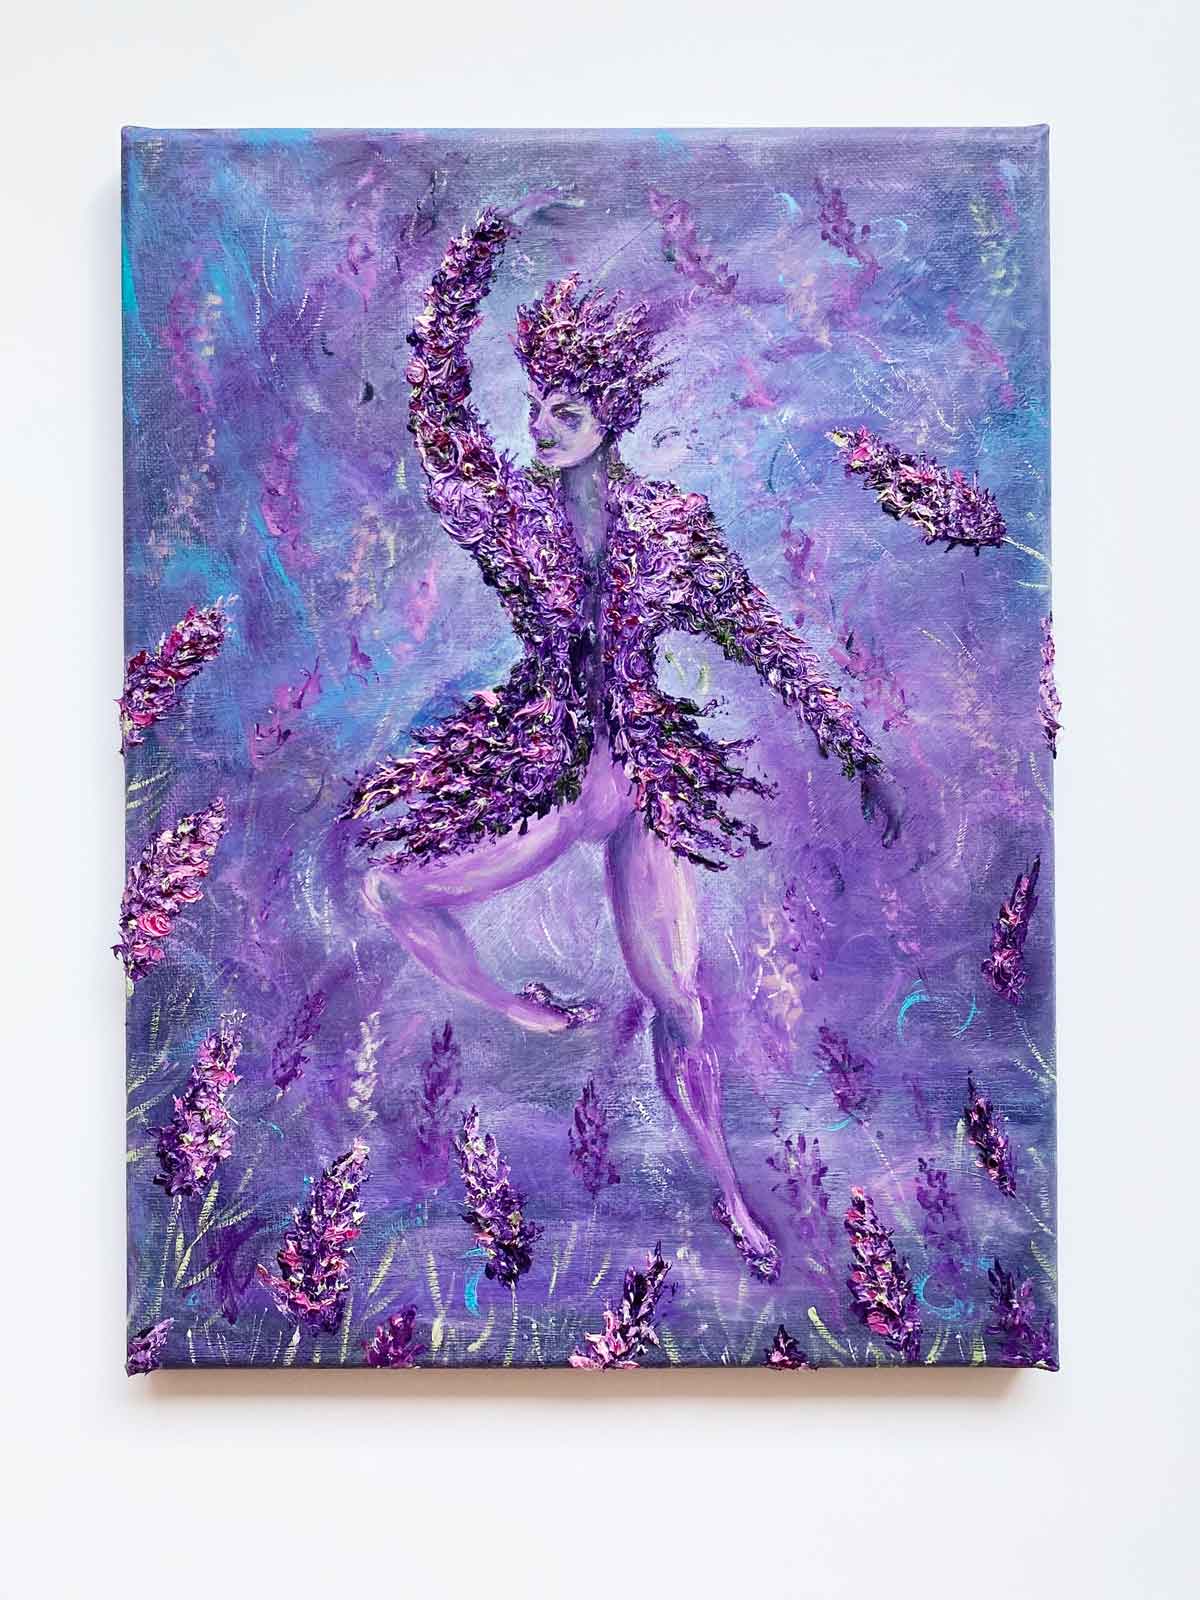 Textured danseur in lavender costume painted against purple background with textured lavender blooms. Shown against light surface.